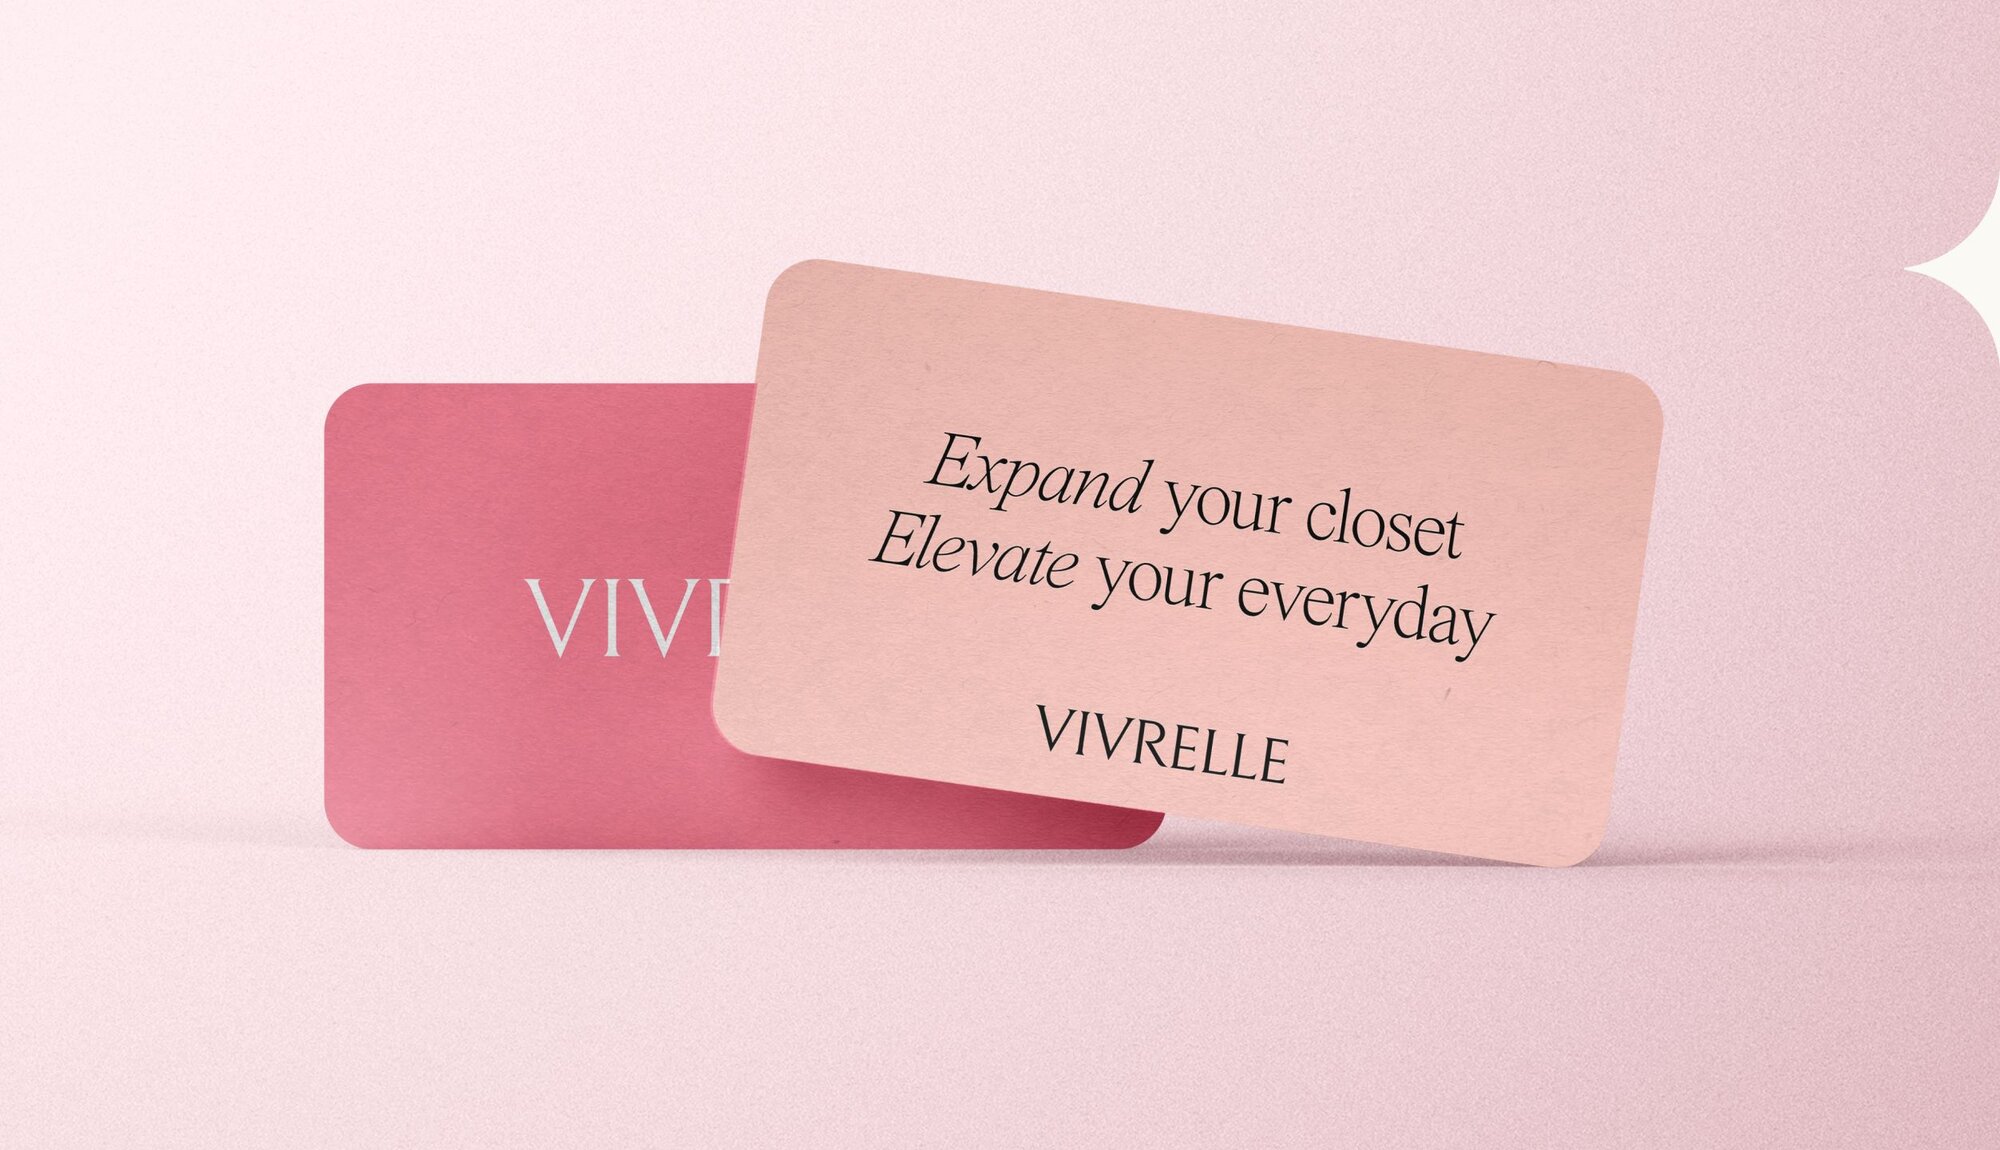 Image of women holding luxury handbags and wearing jewelry from Vivrelle.